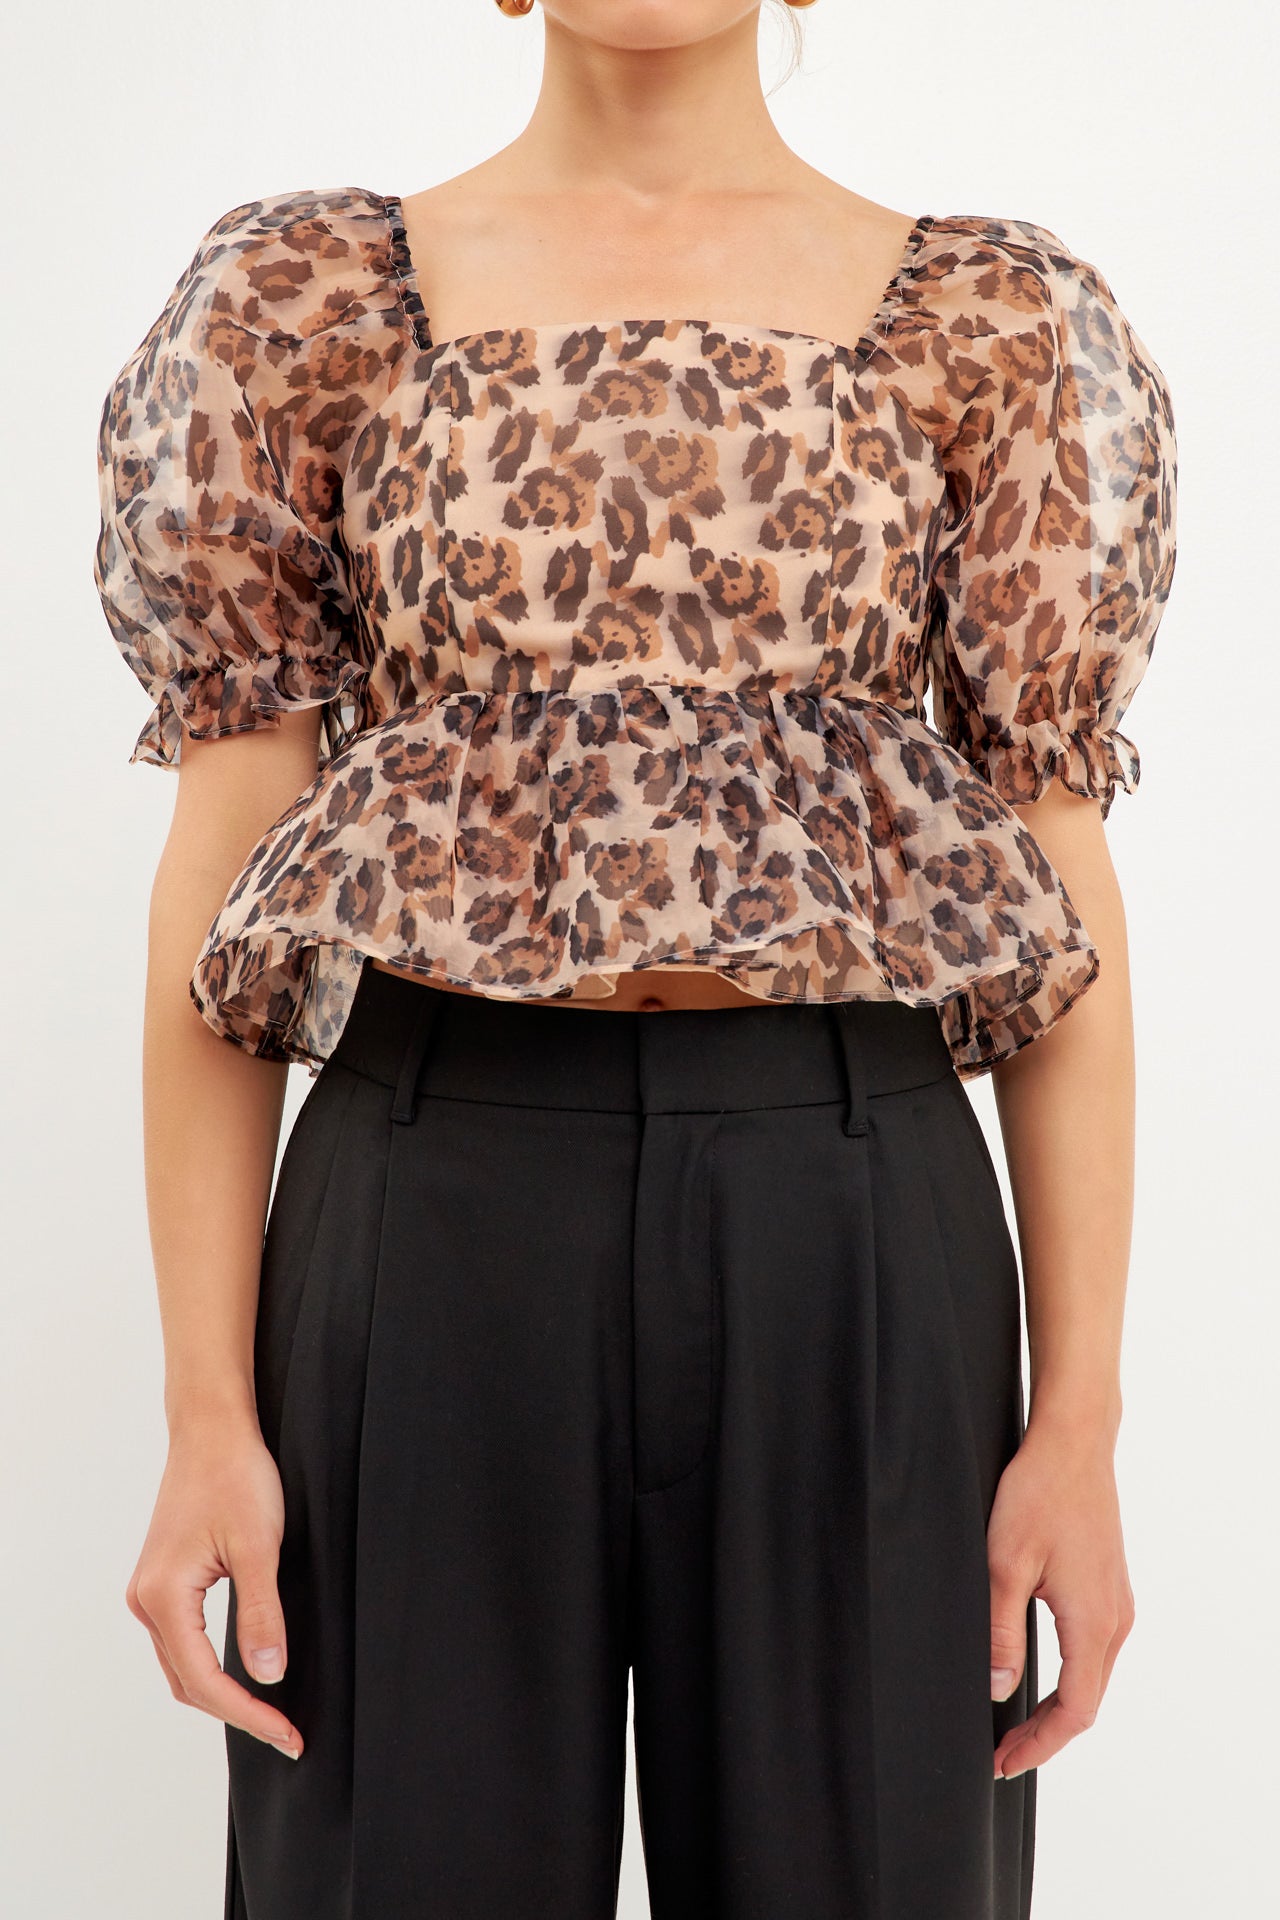 ENDLESS ROSE - Organza Animal Printed Top - TOPS available at Objectrare